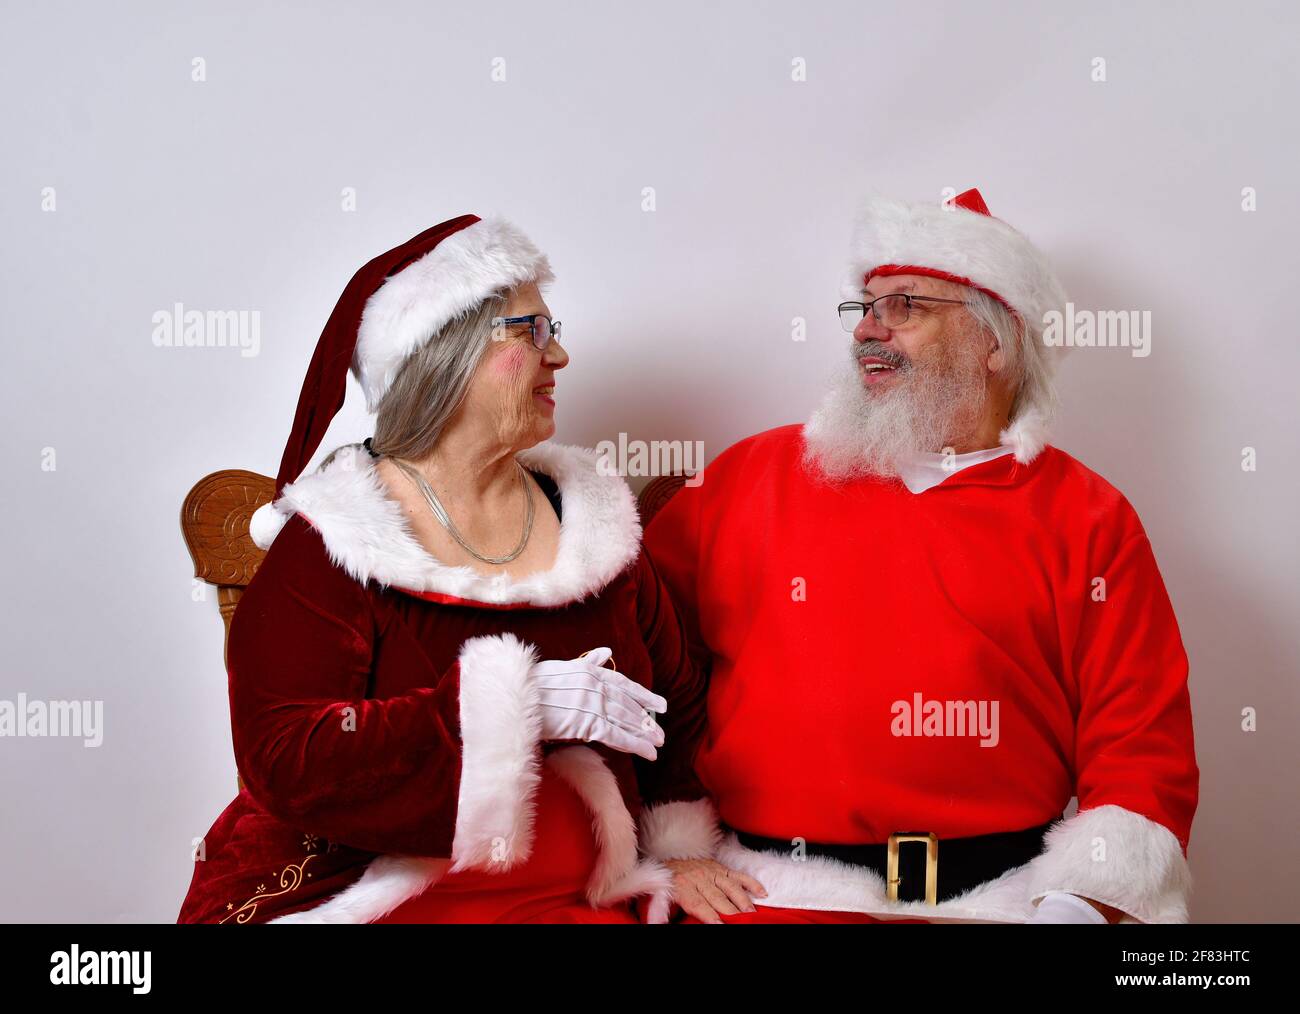 Lovely Mr and Mrs Santa Claus enjoying each other's company Stock Photo